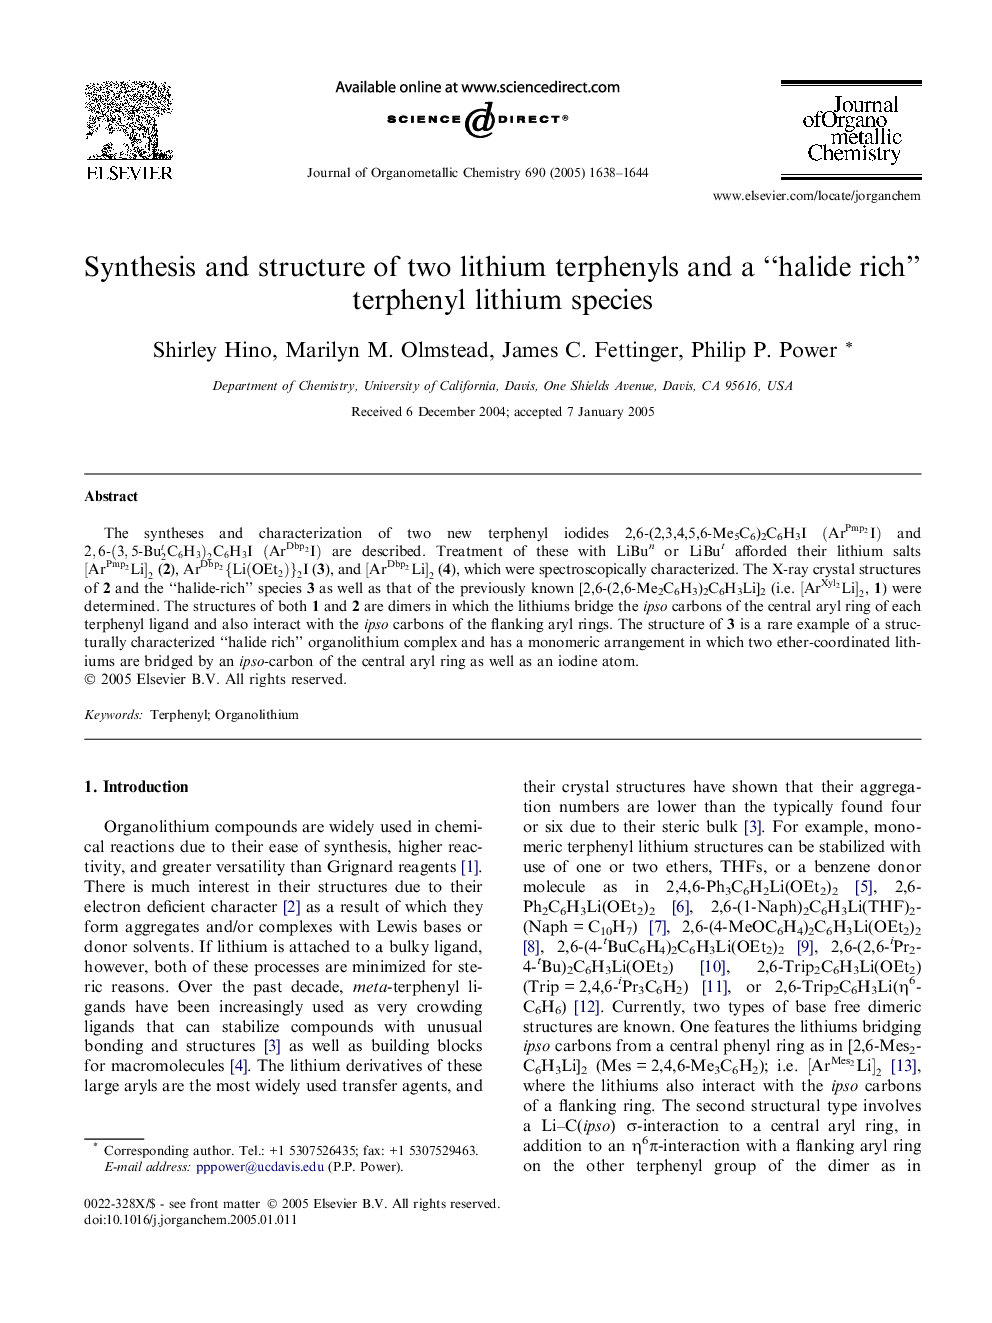 Synthesis and structure of two lithium terphenyls and a “halide rich” terphenyl lithium species